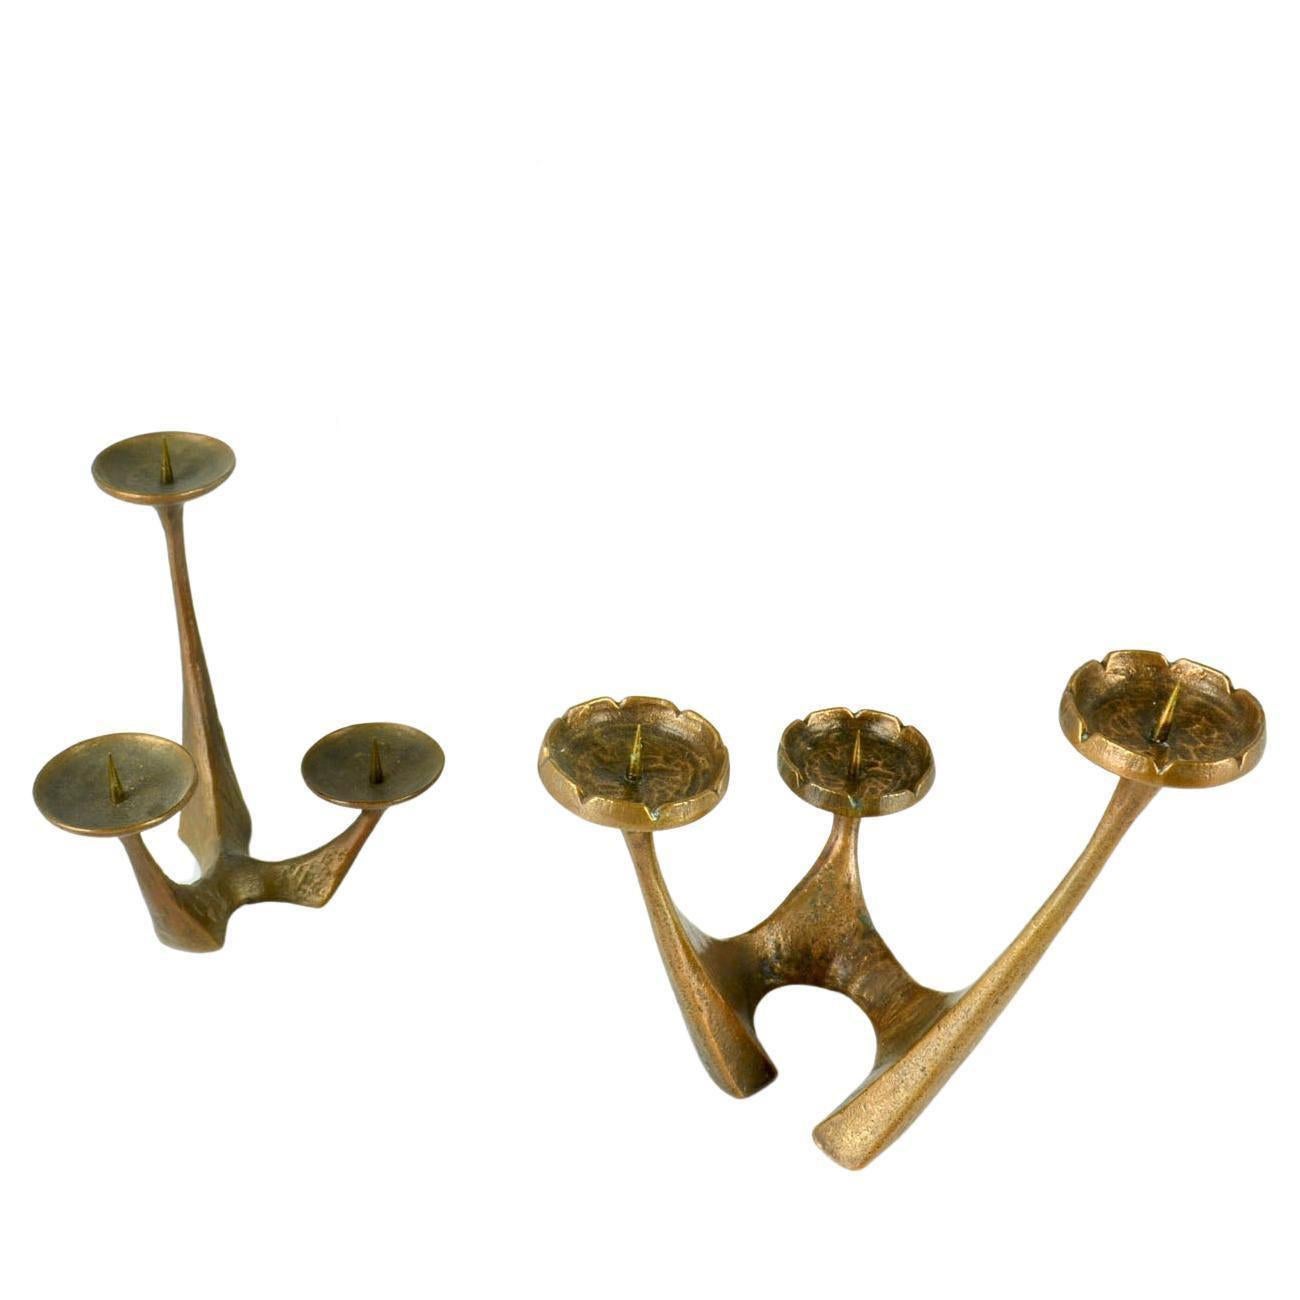 Three free form bronze cast candelabras folding candles on alternating heights. They hold candles from regular up to 6 cm Their organic shapes and texture make them very sculptural.
They will make great decoration for the festive season.

Priced and